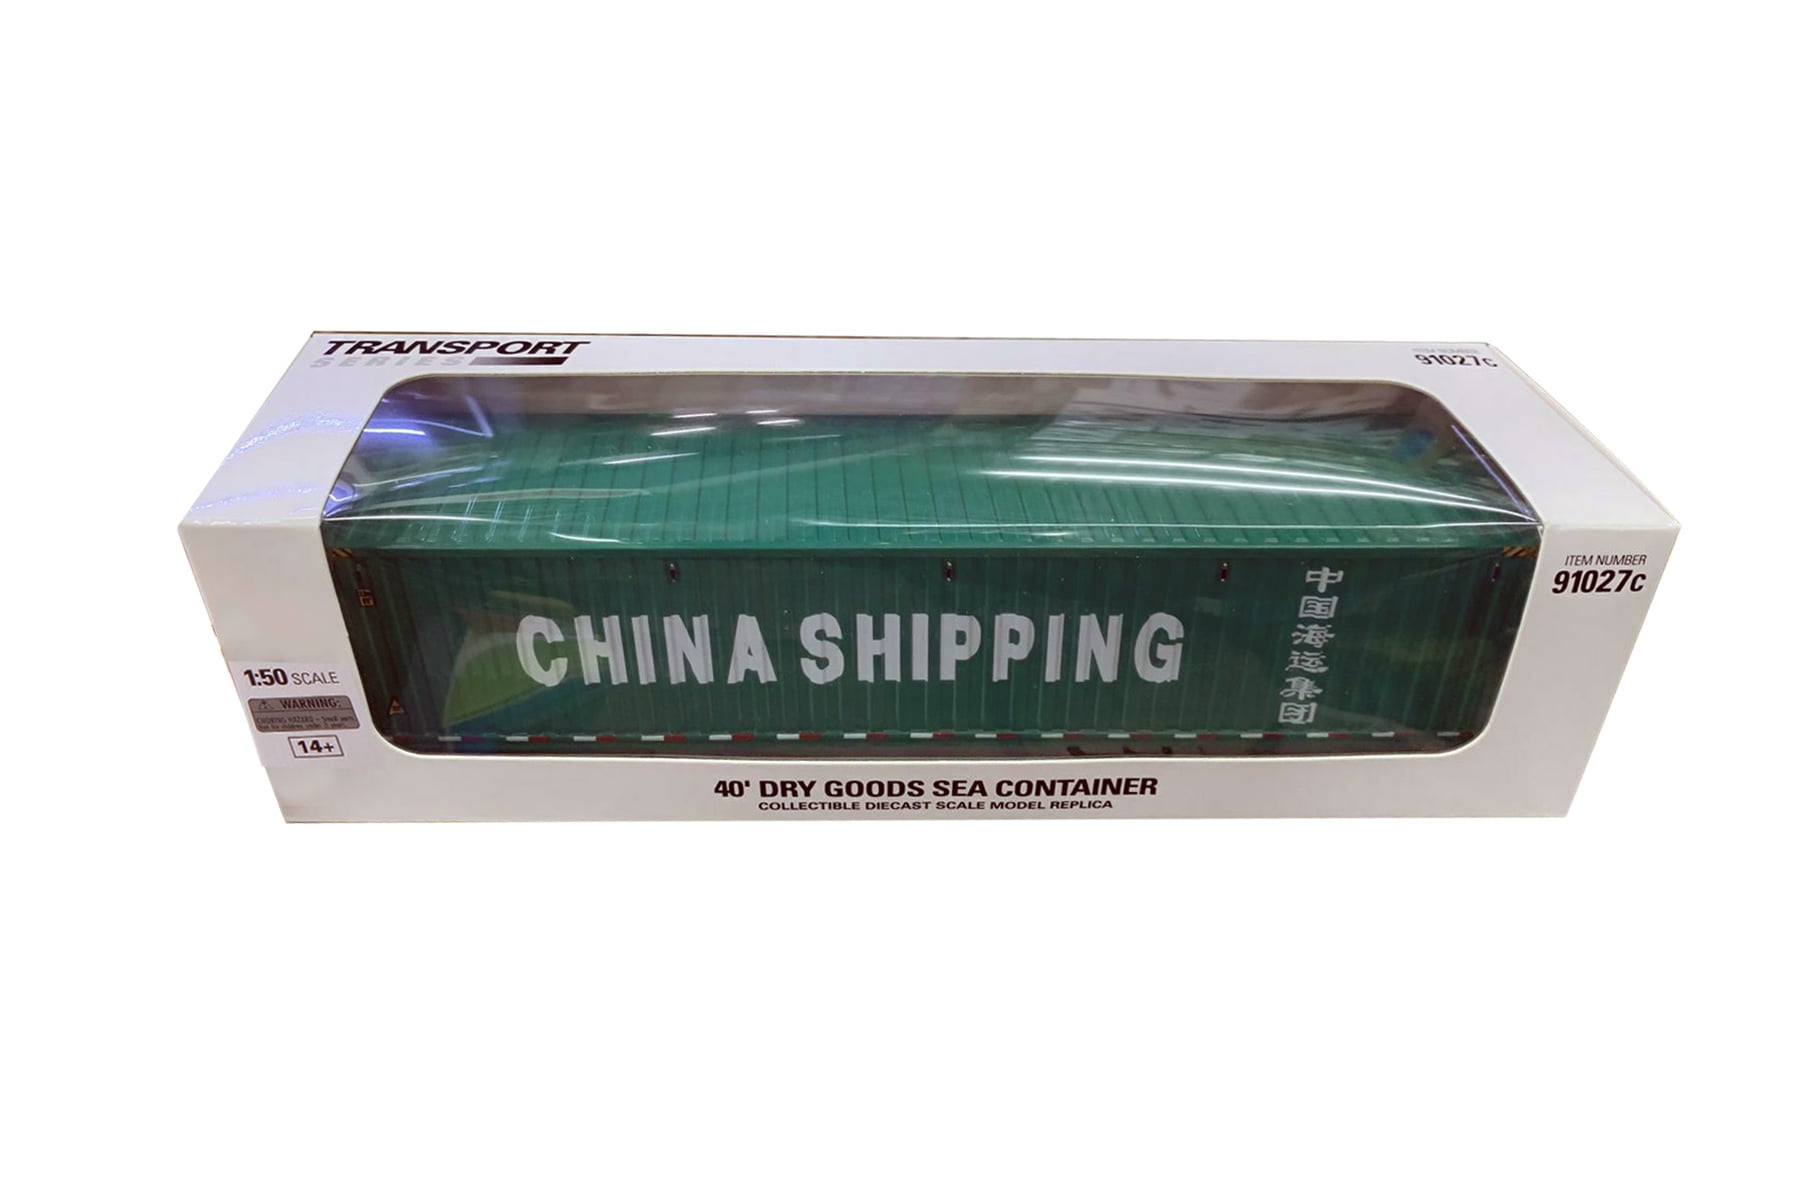 40' Dry Goods Sea Container Plastic China Shipping 1:50 Diecast Masters 91027C 